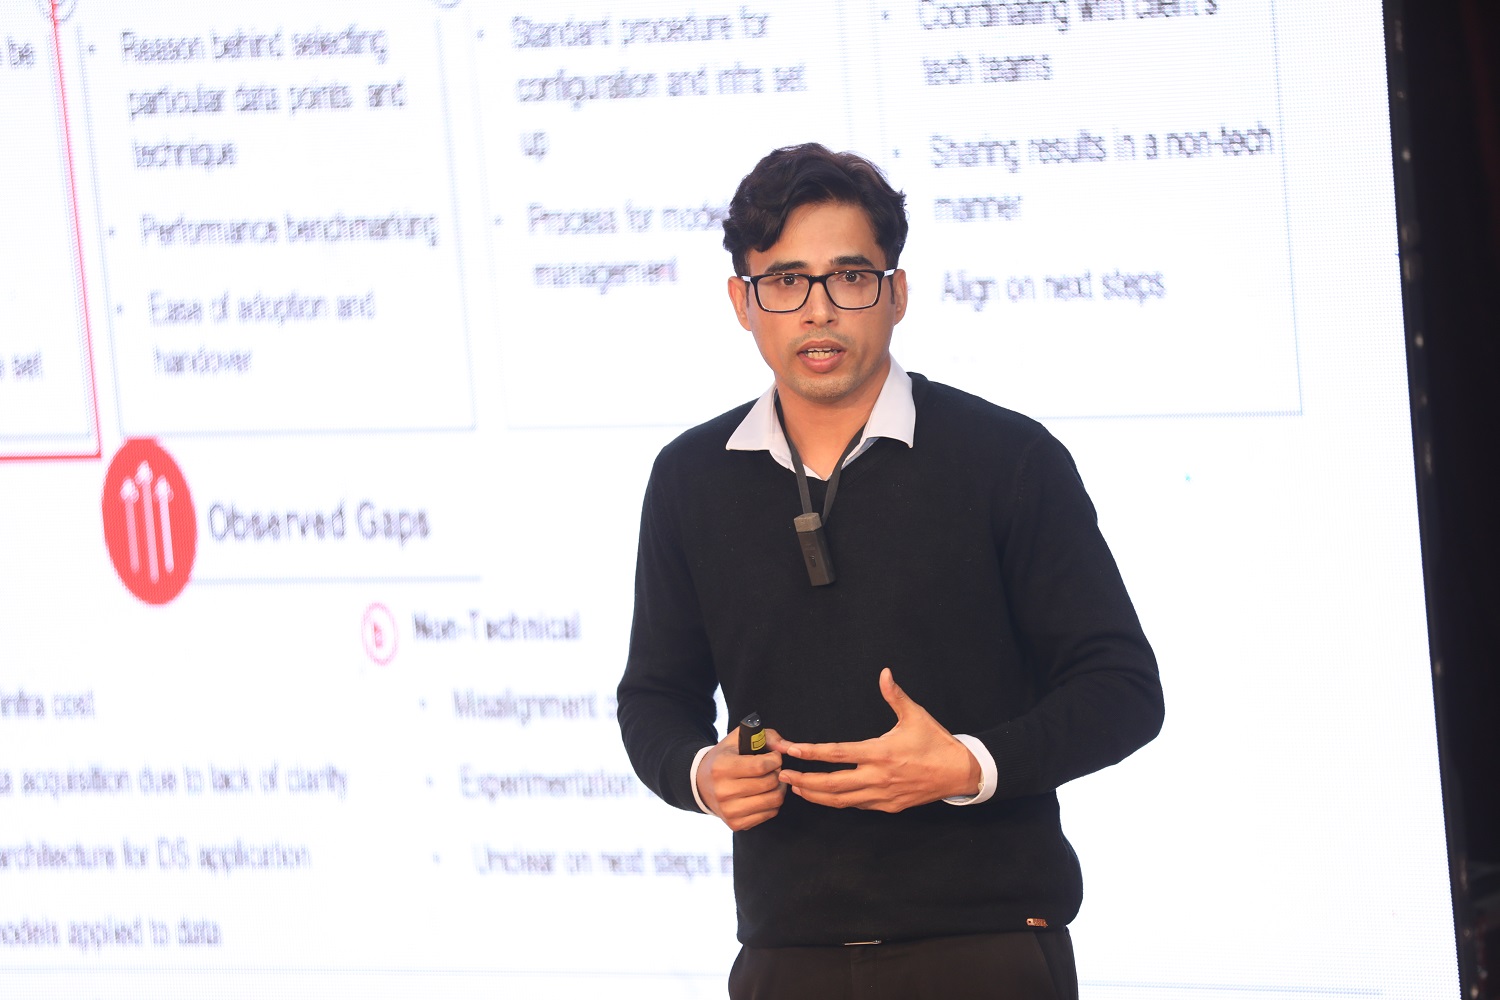 Mr. Pramod Singh, Director, Data Science and ML Engineering, Bain and Company, speaks on ‘How is a Data Scientist’s Profile Evolving in Today’s Business World?’